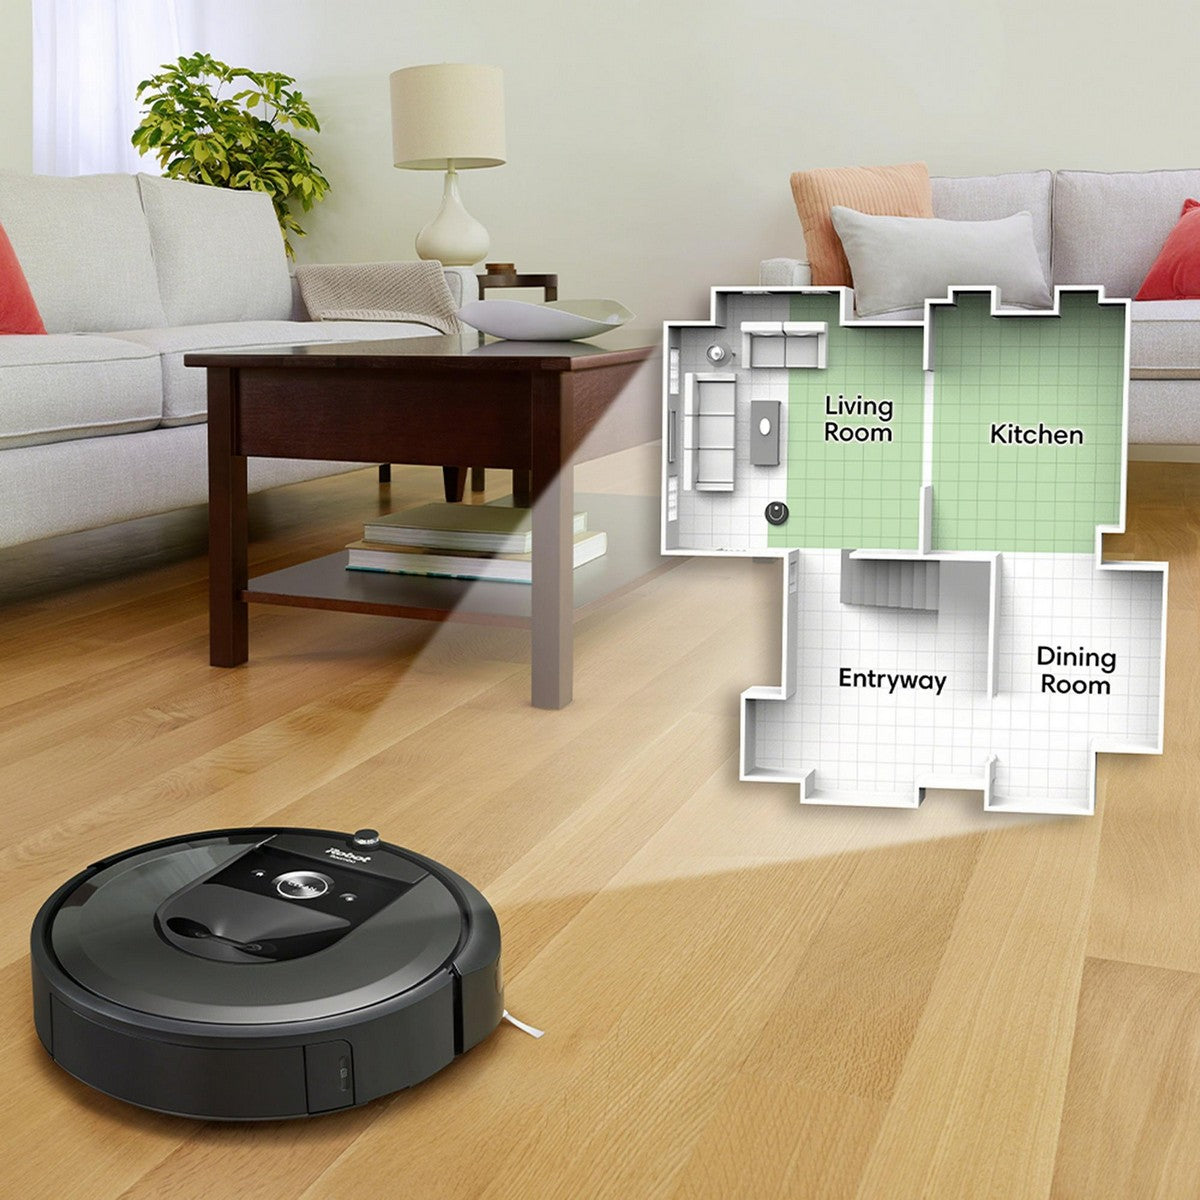 iRobot-Roomba-i7-Wi-Fi-Connected-Robot-Vacuum-Cleaner-listing-home-layout.